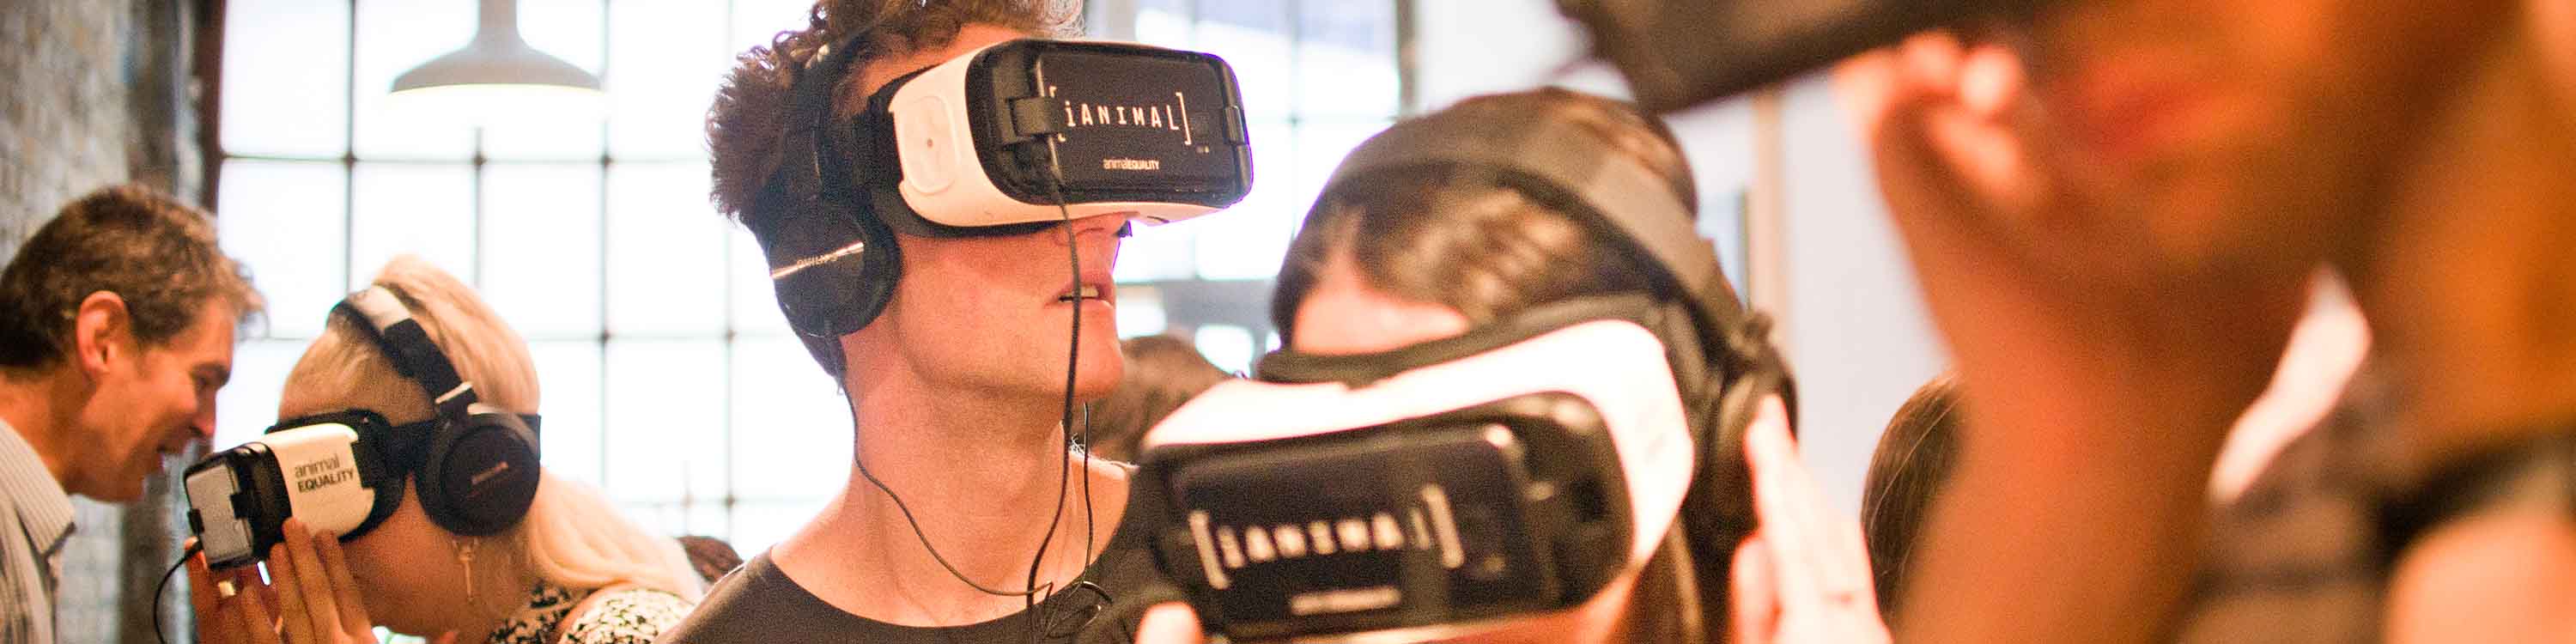 Event with iAnimal virtual reality headsets